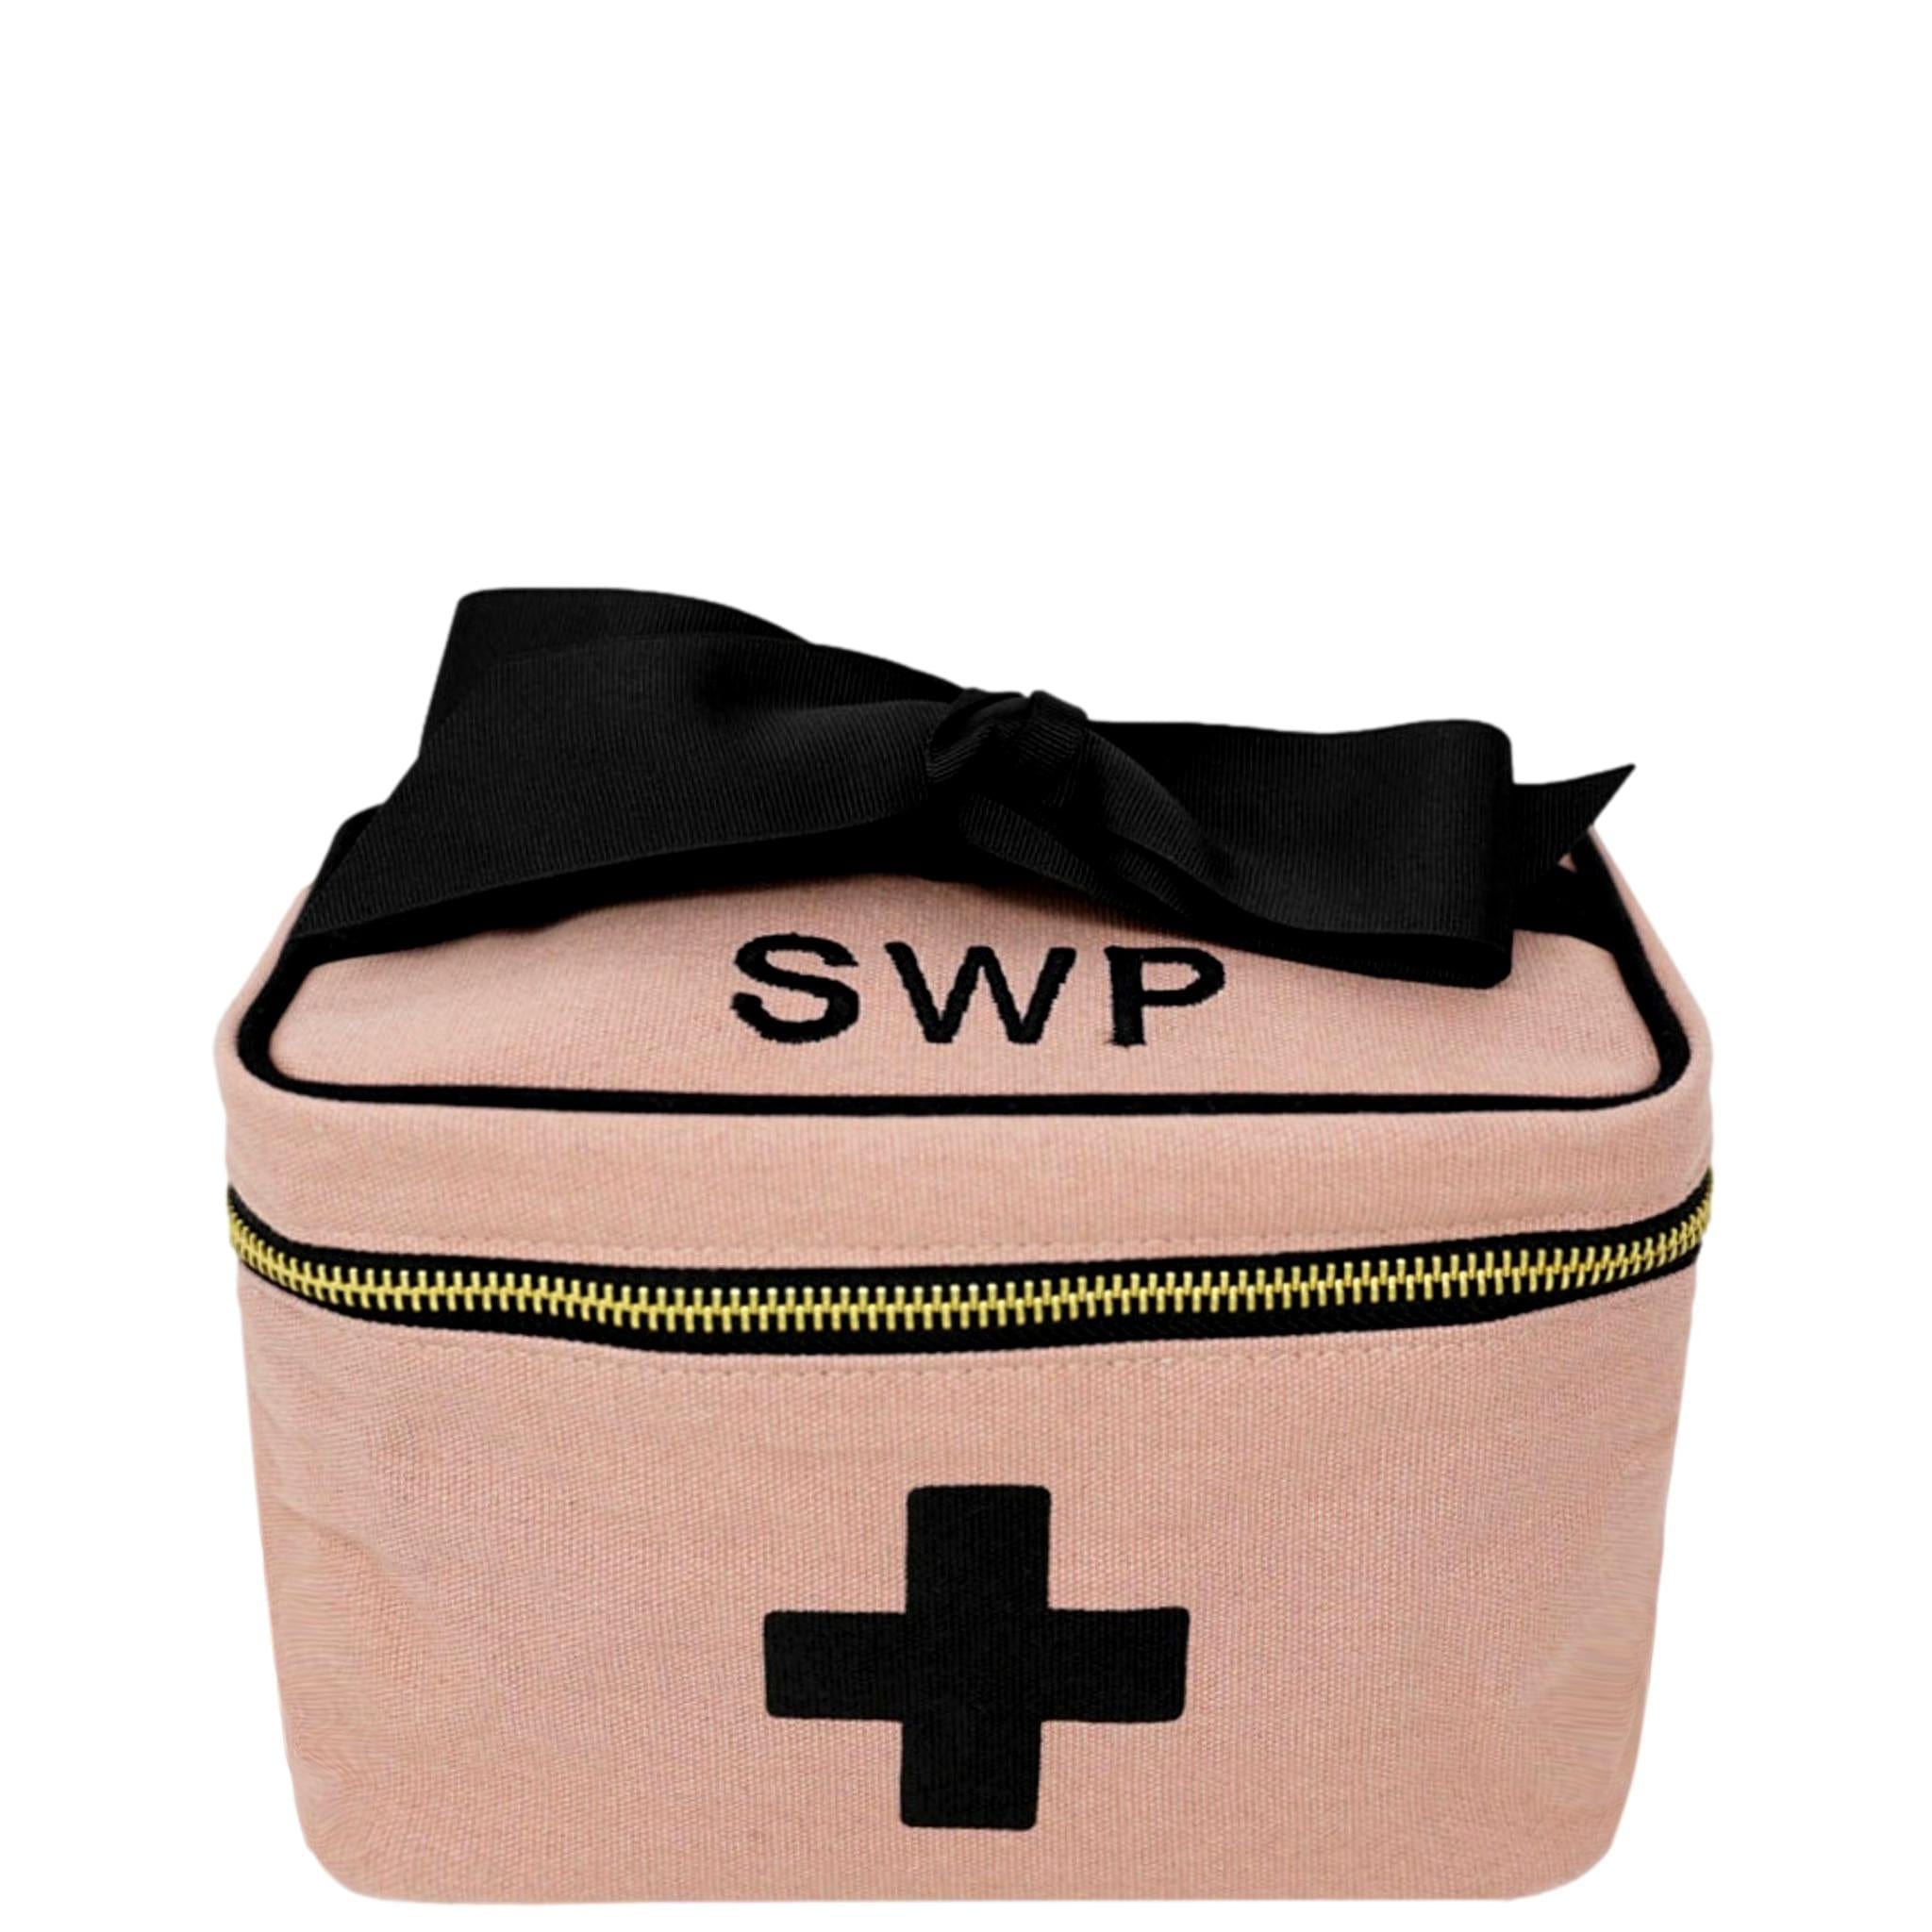 First Aid Storage Box Pink - Bag-all